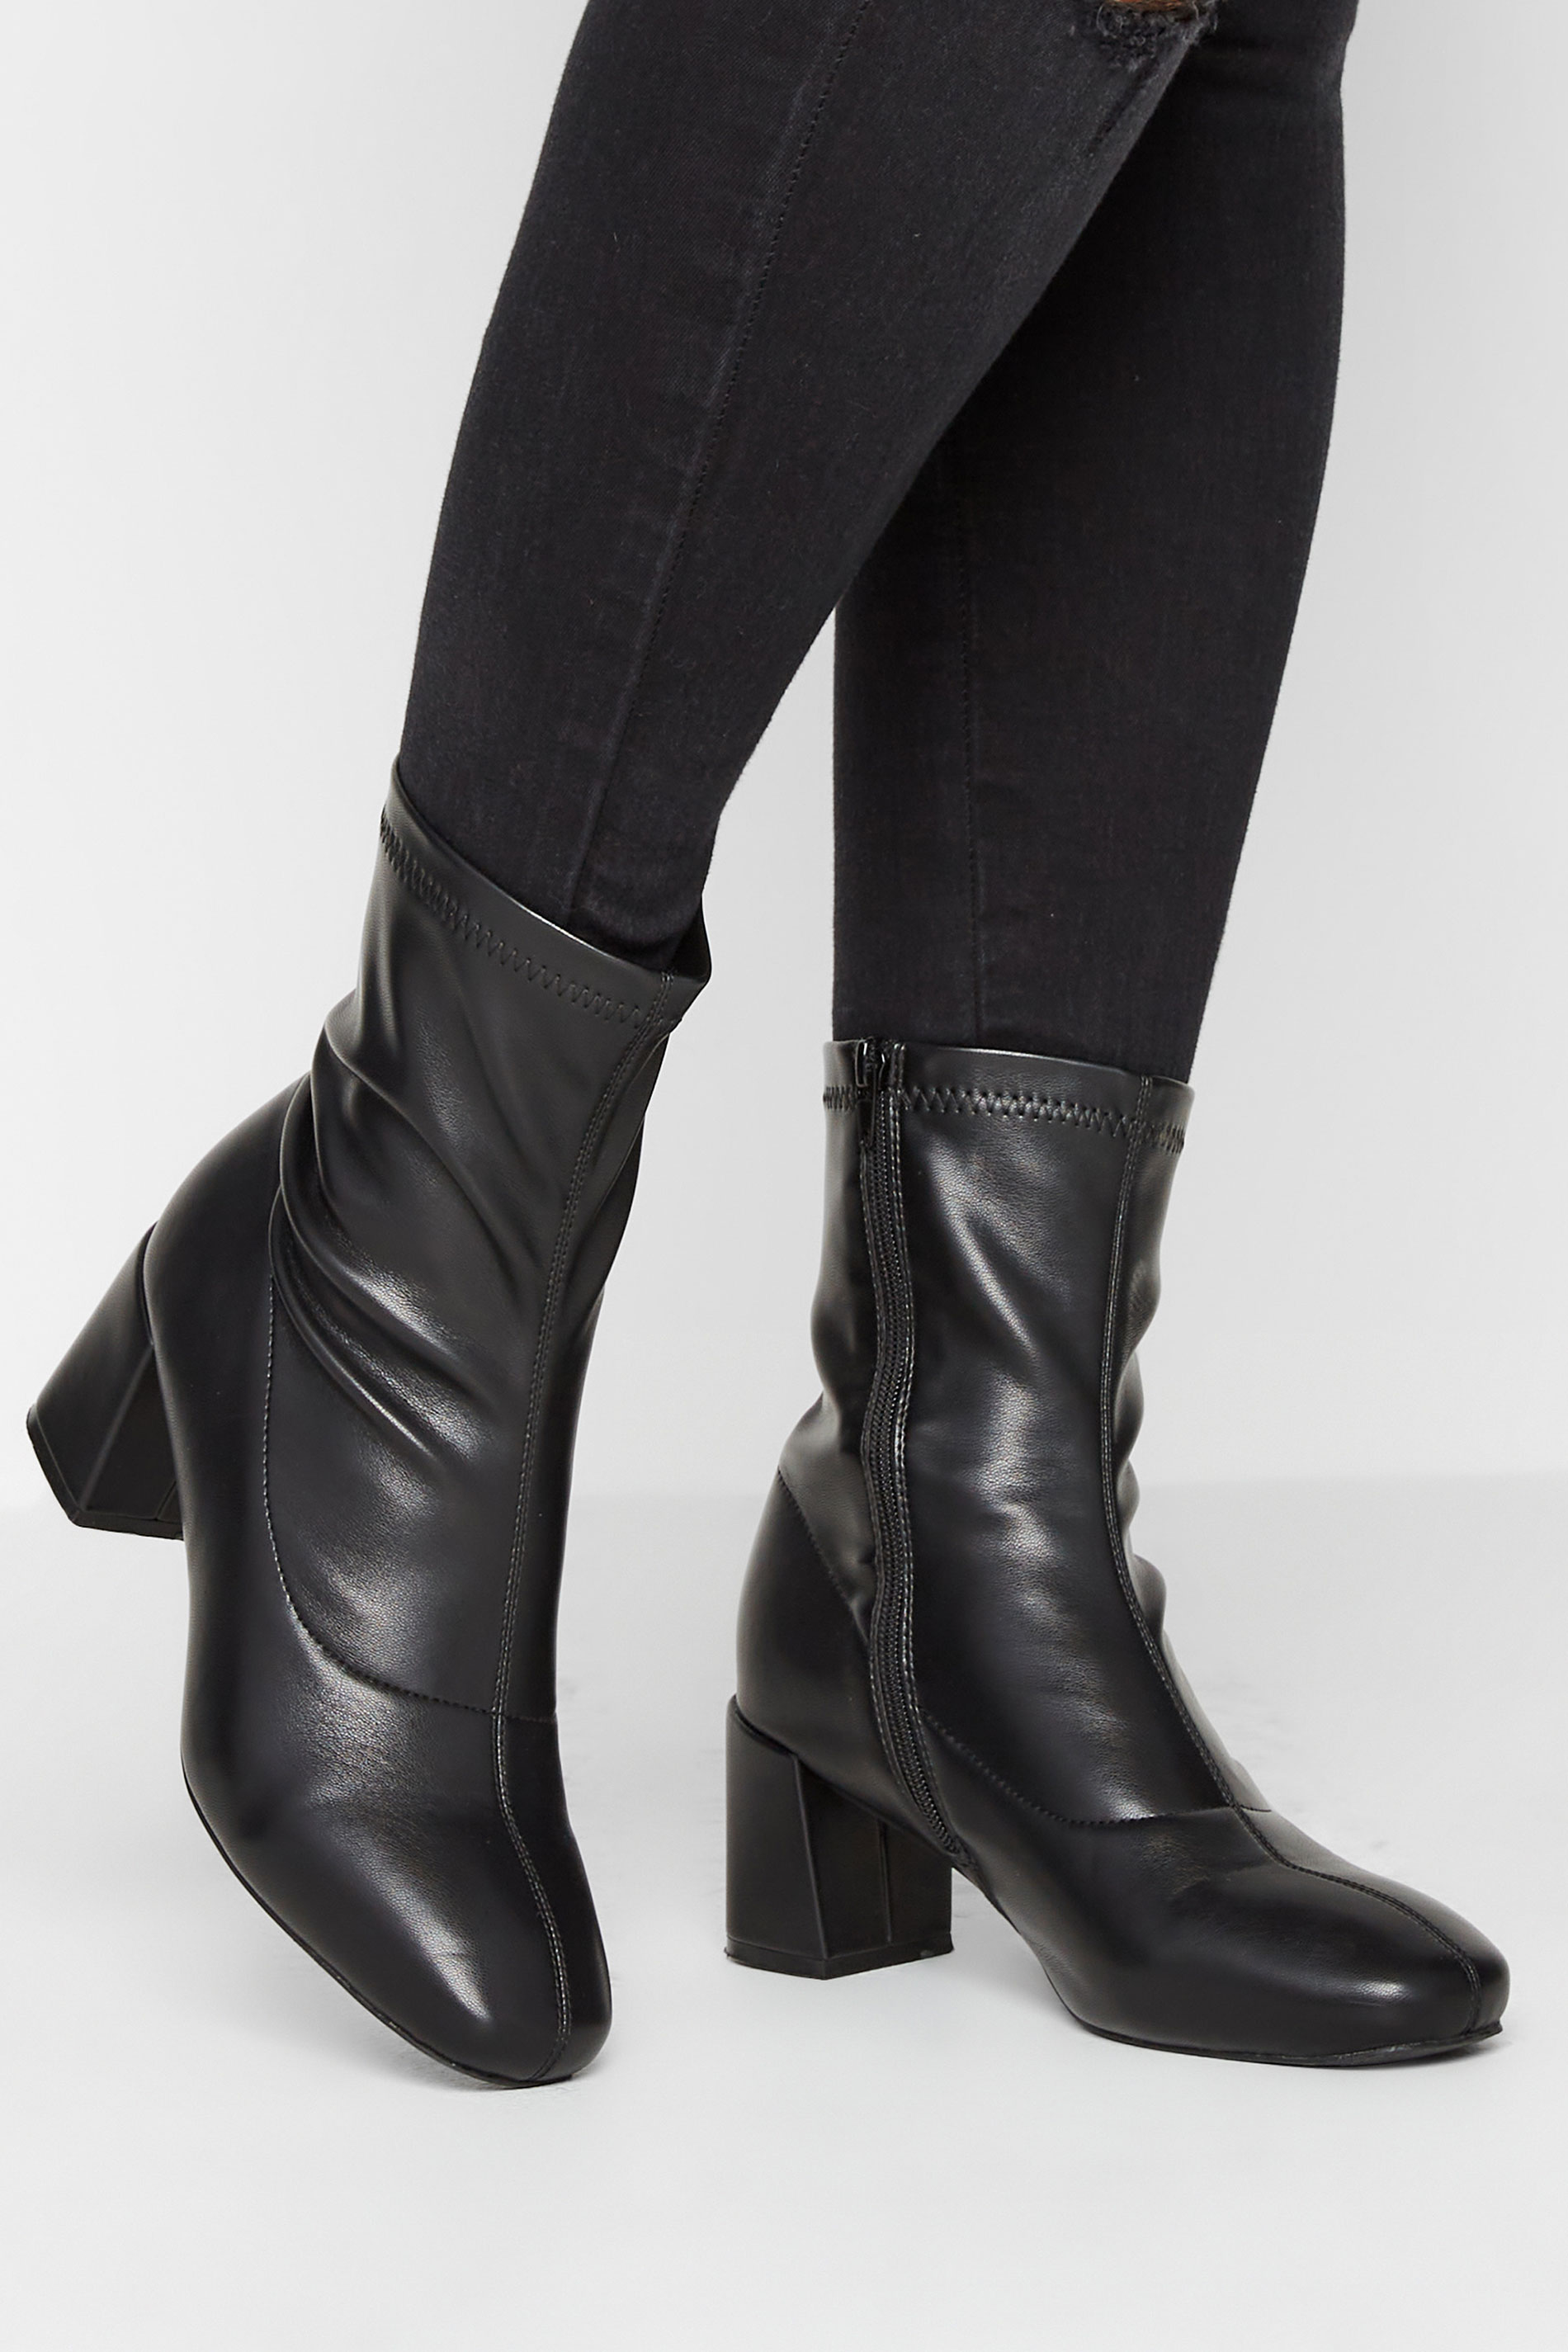 Black Square Toe Heeled Boots In Wide E Fit & Extra Wide EEE Fit | Long ...